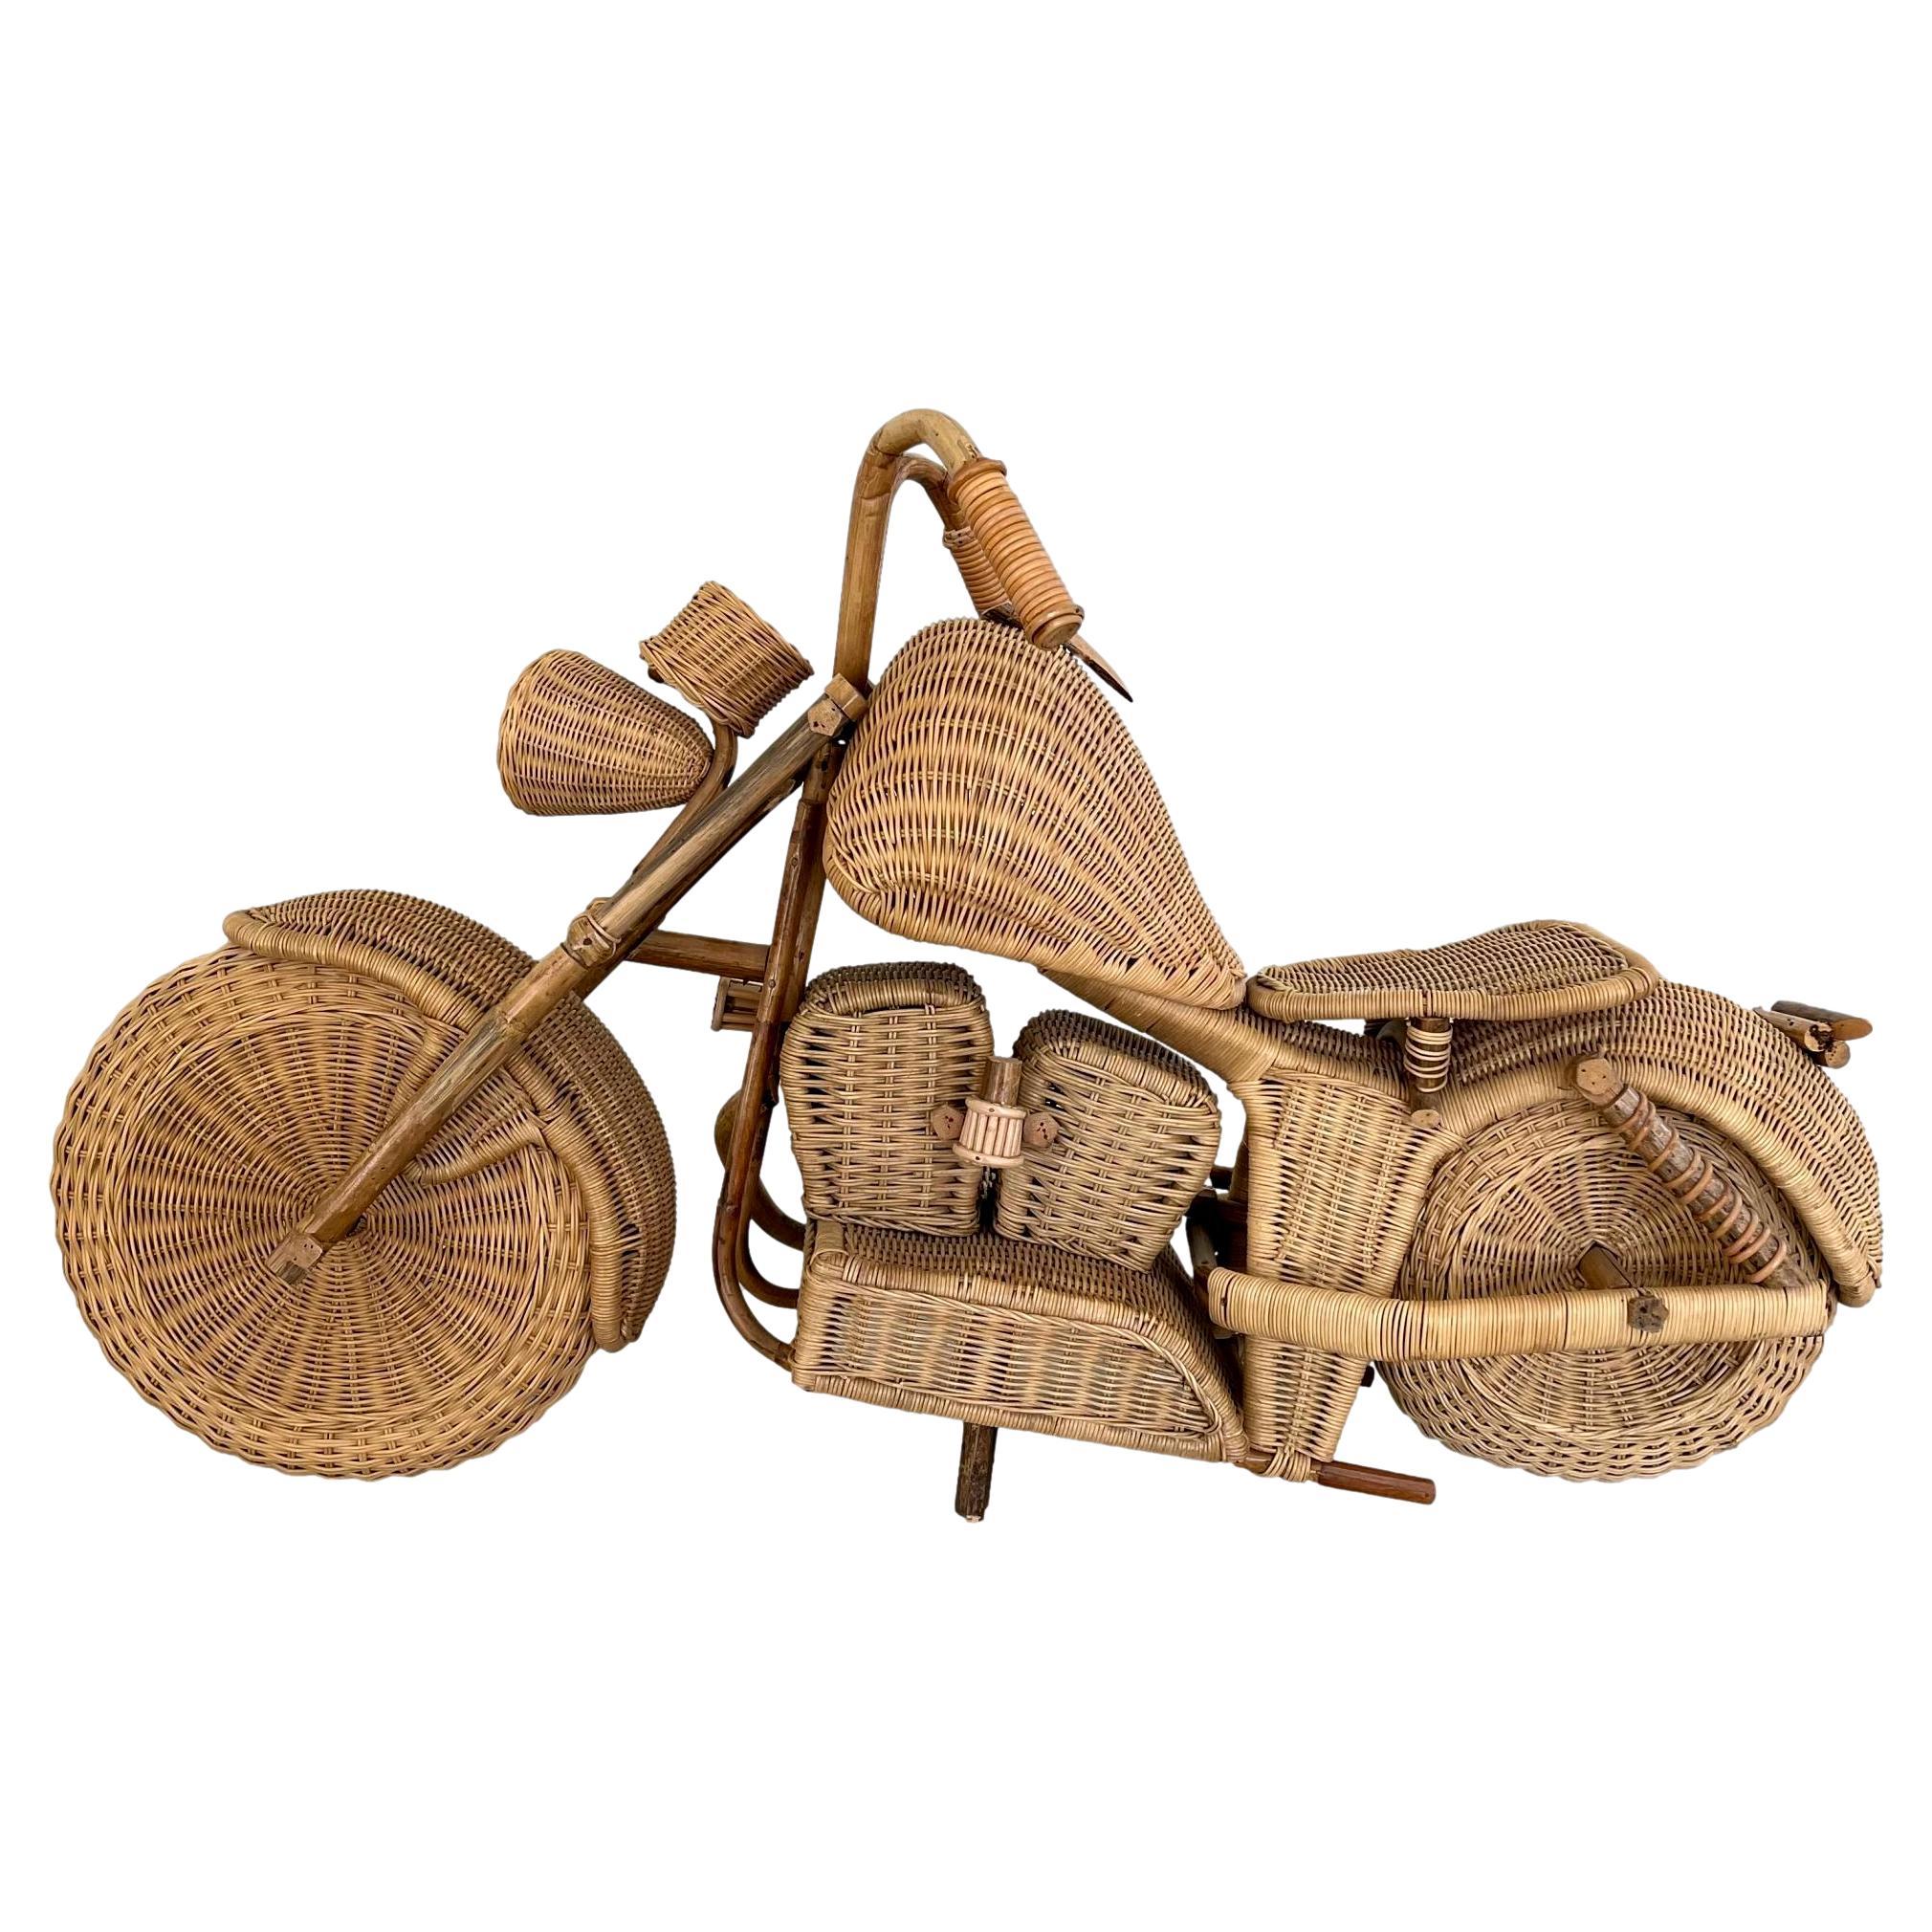 Massive Rattan, Bamboo and Wicker Harley Davidson Motorcycle For Sale